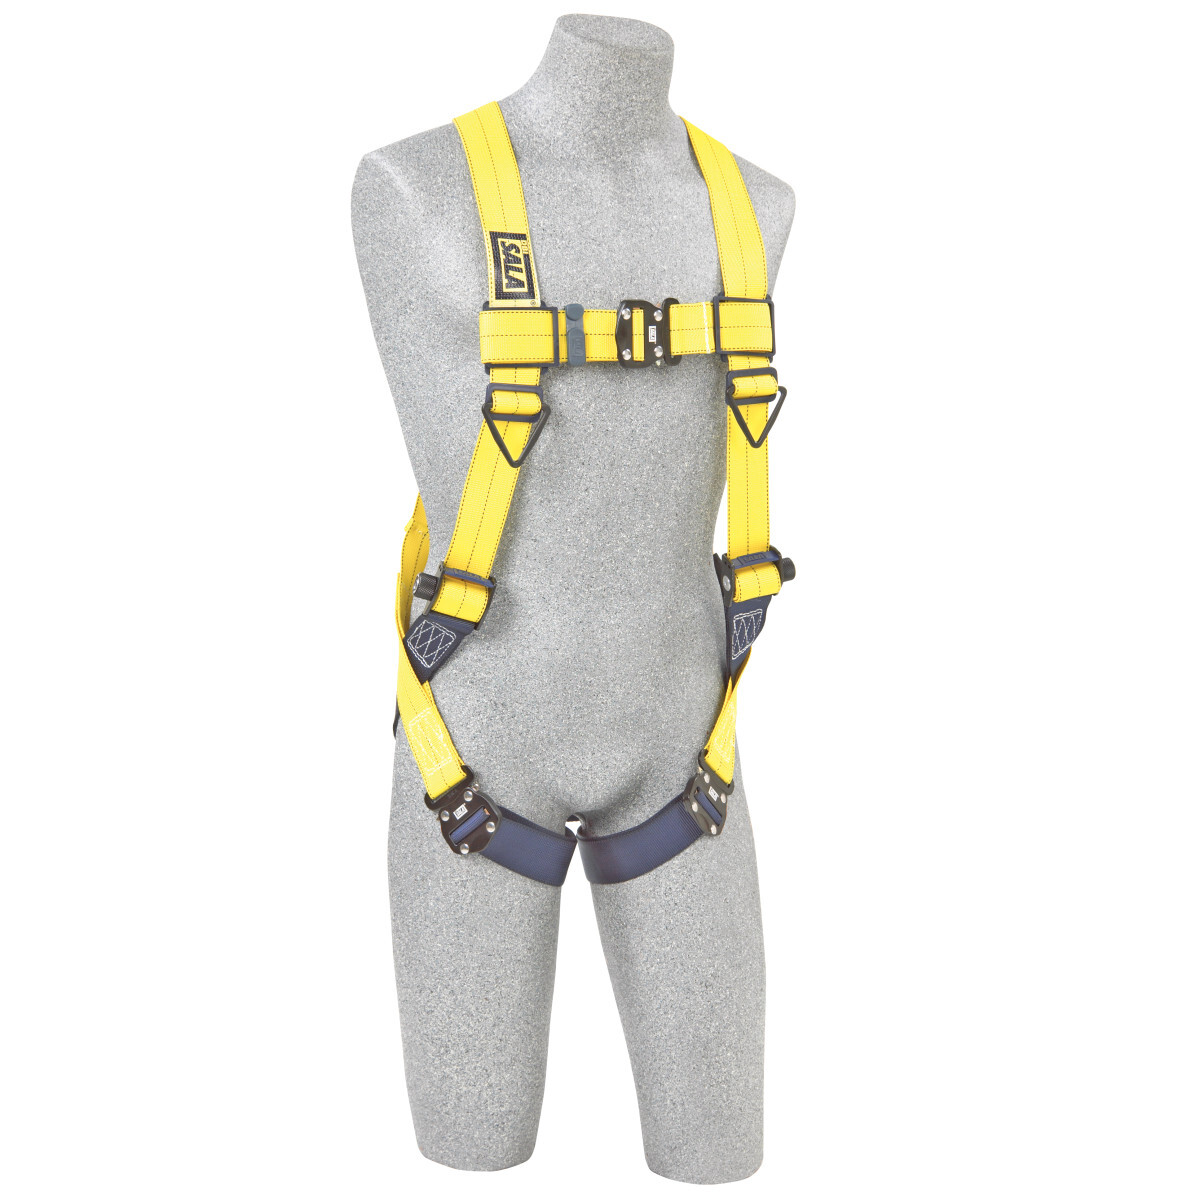 3M™ DBI-SALA® 3X Delta™ No-Tangle™ Full Body/Vest Style Harness With Back D-Ring And Tech-Lite™ Quick Connect Leg Strap Buckle